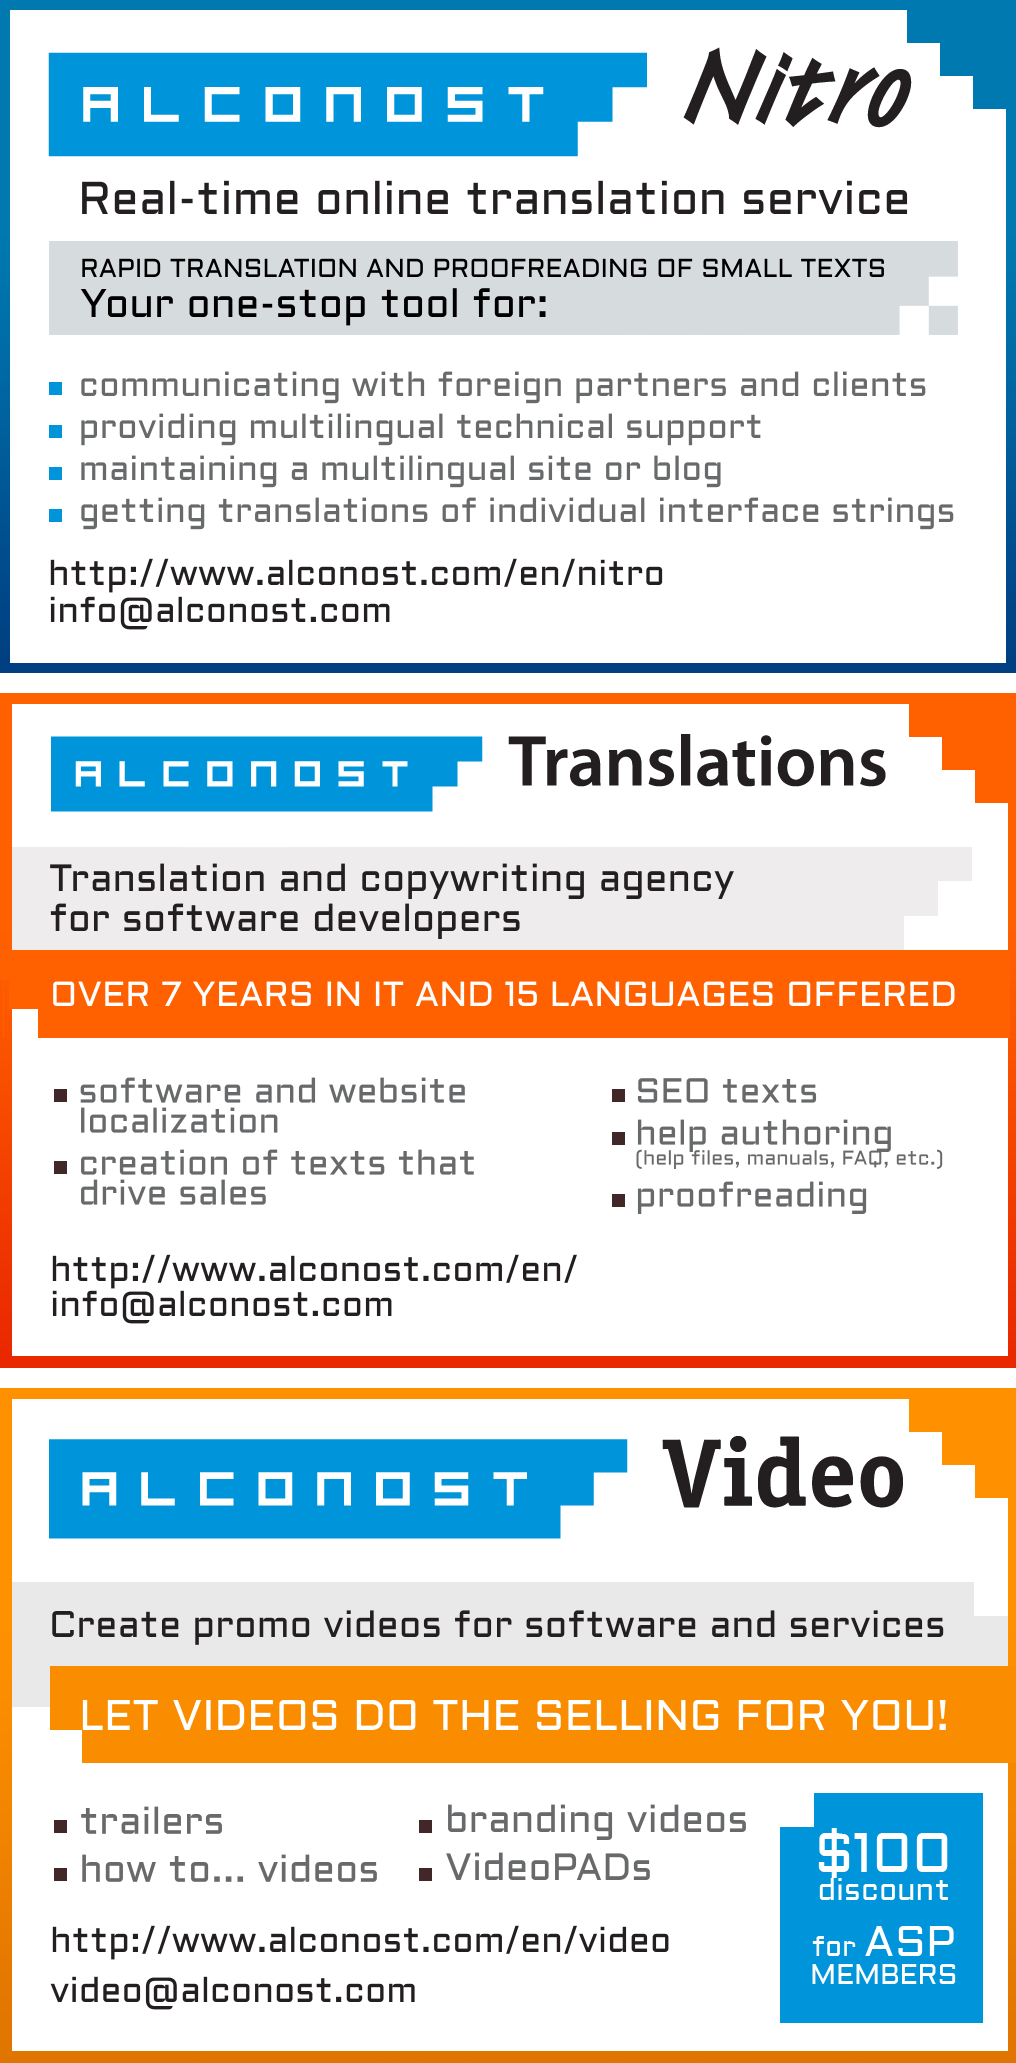 Advertising for Alconost